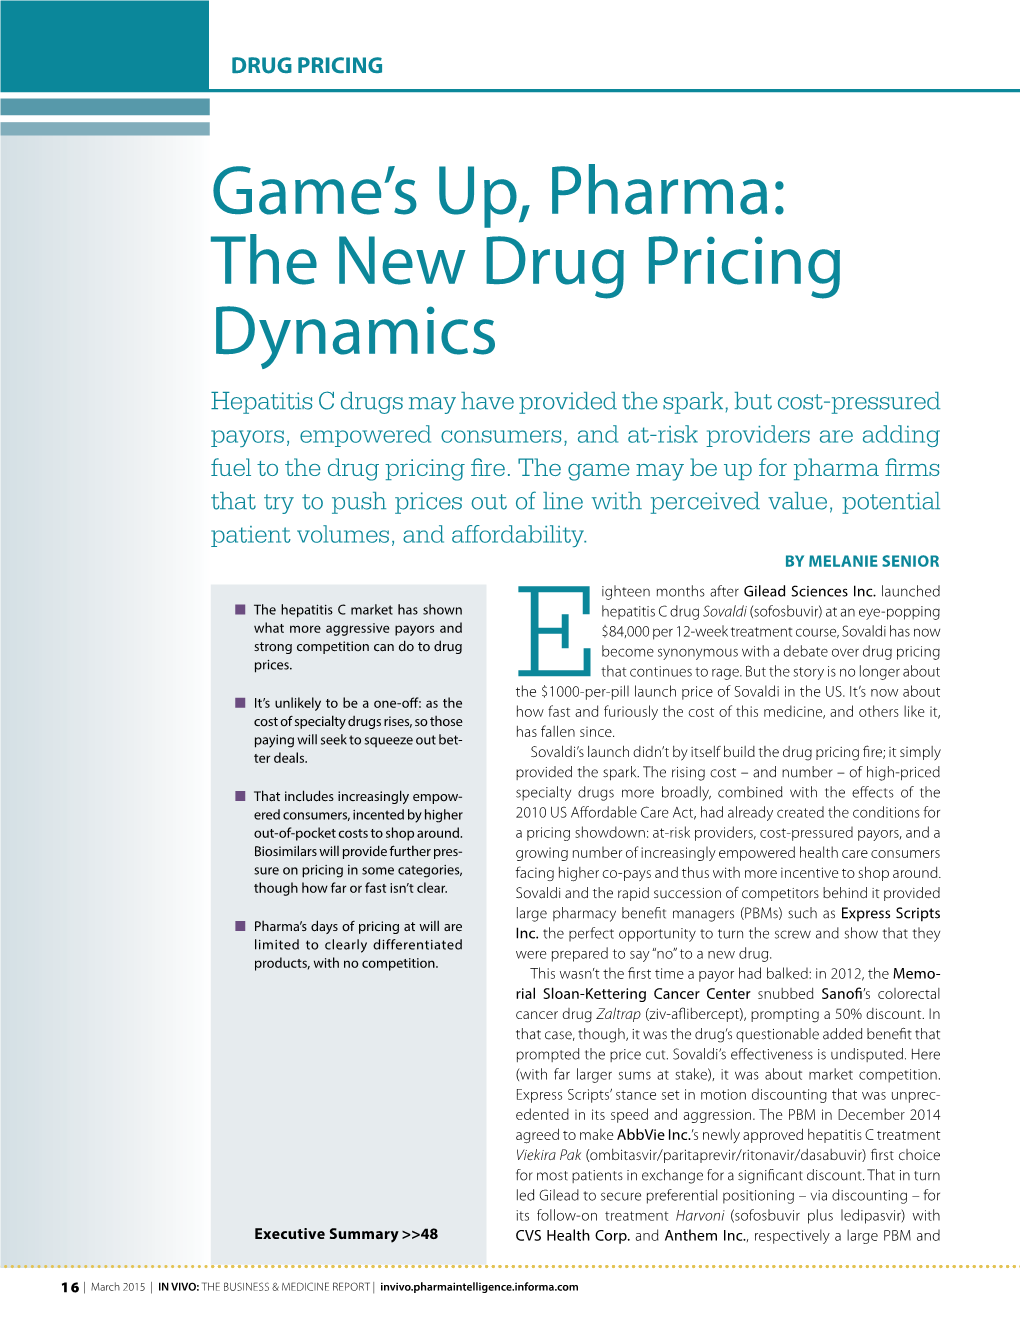 Game's Up, Pharma: the New Drug Pricing Dynamics